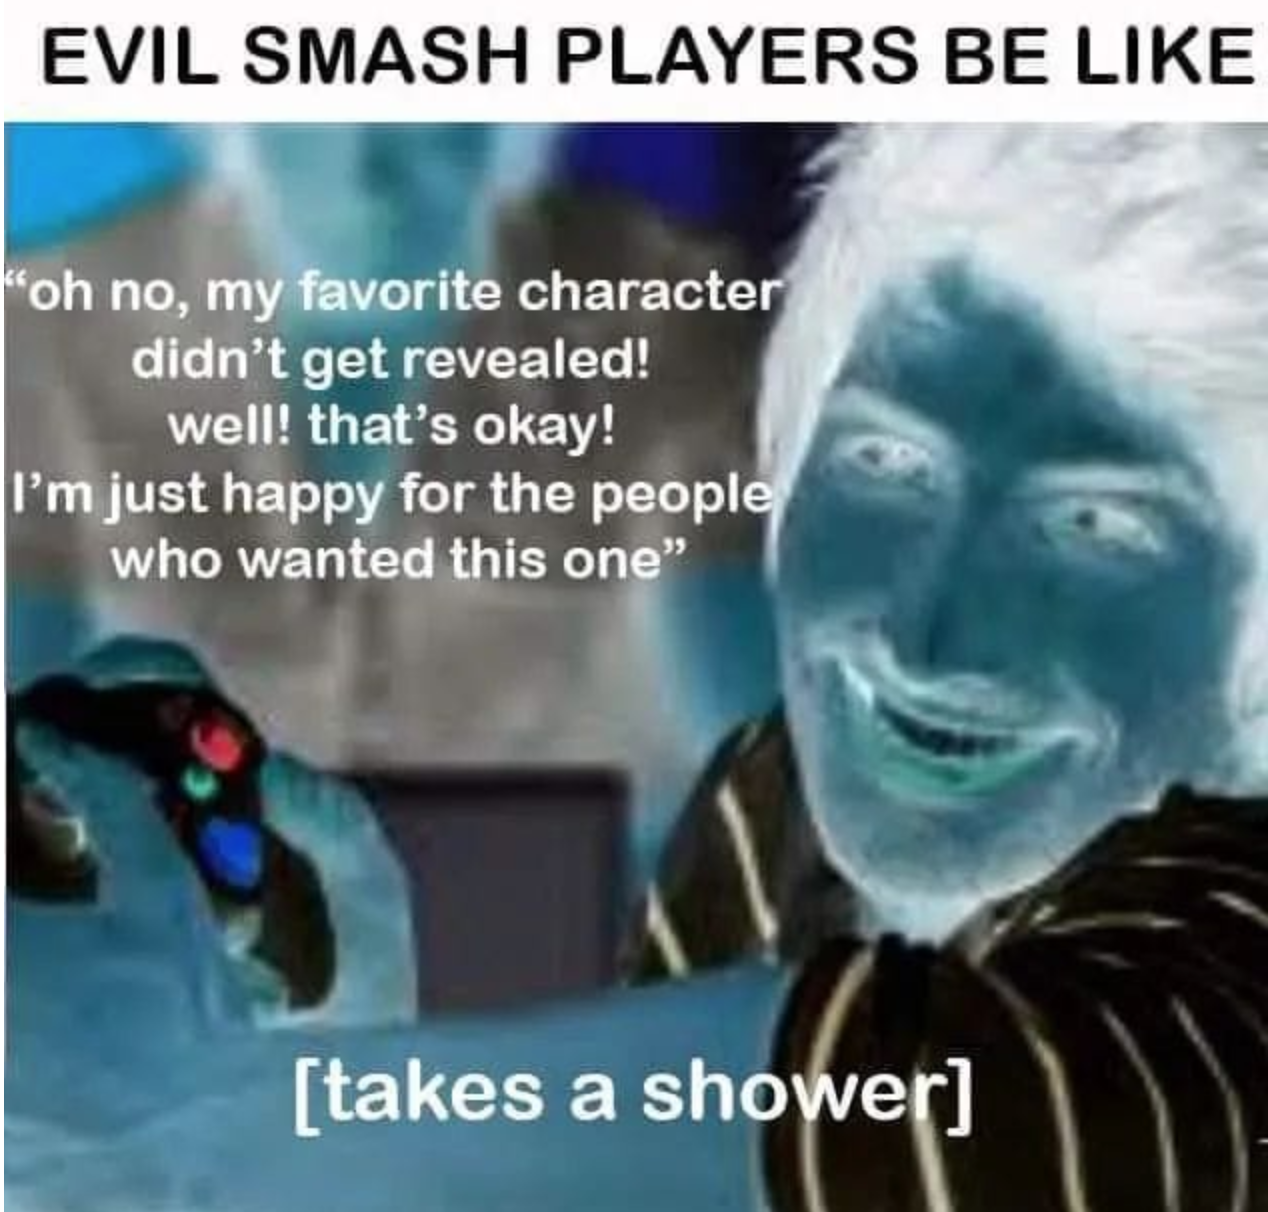 funny gaming memes - Pyrocynical - Evil Smash Players Be oh no, my favorite character didn't get revealed! well! that's okay! I'm just happy for the people who wanted this one" takes a shower